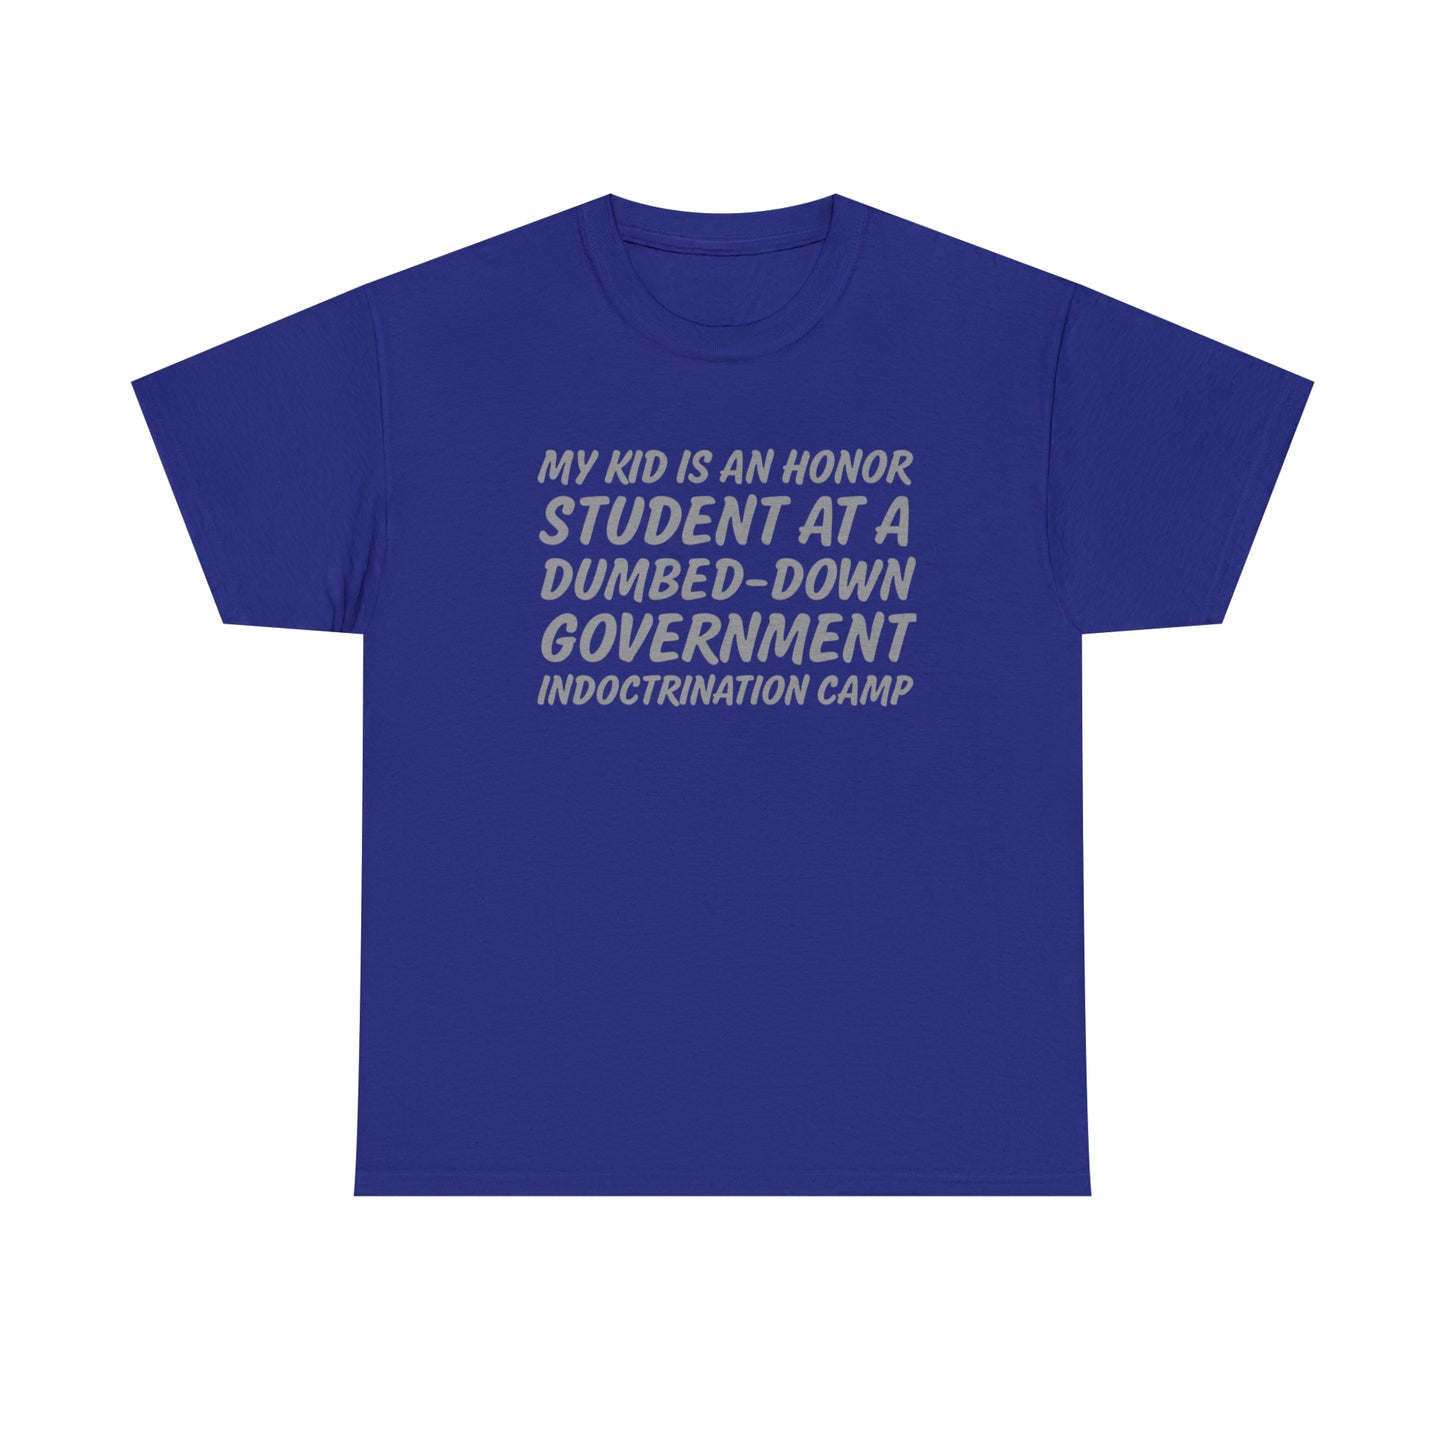 Honor Student T-Shirt For Conservative TShirt For Indoctrination Camp T Shirt For Dumb Down Shirt For Parent TShirt